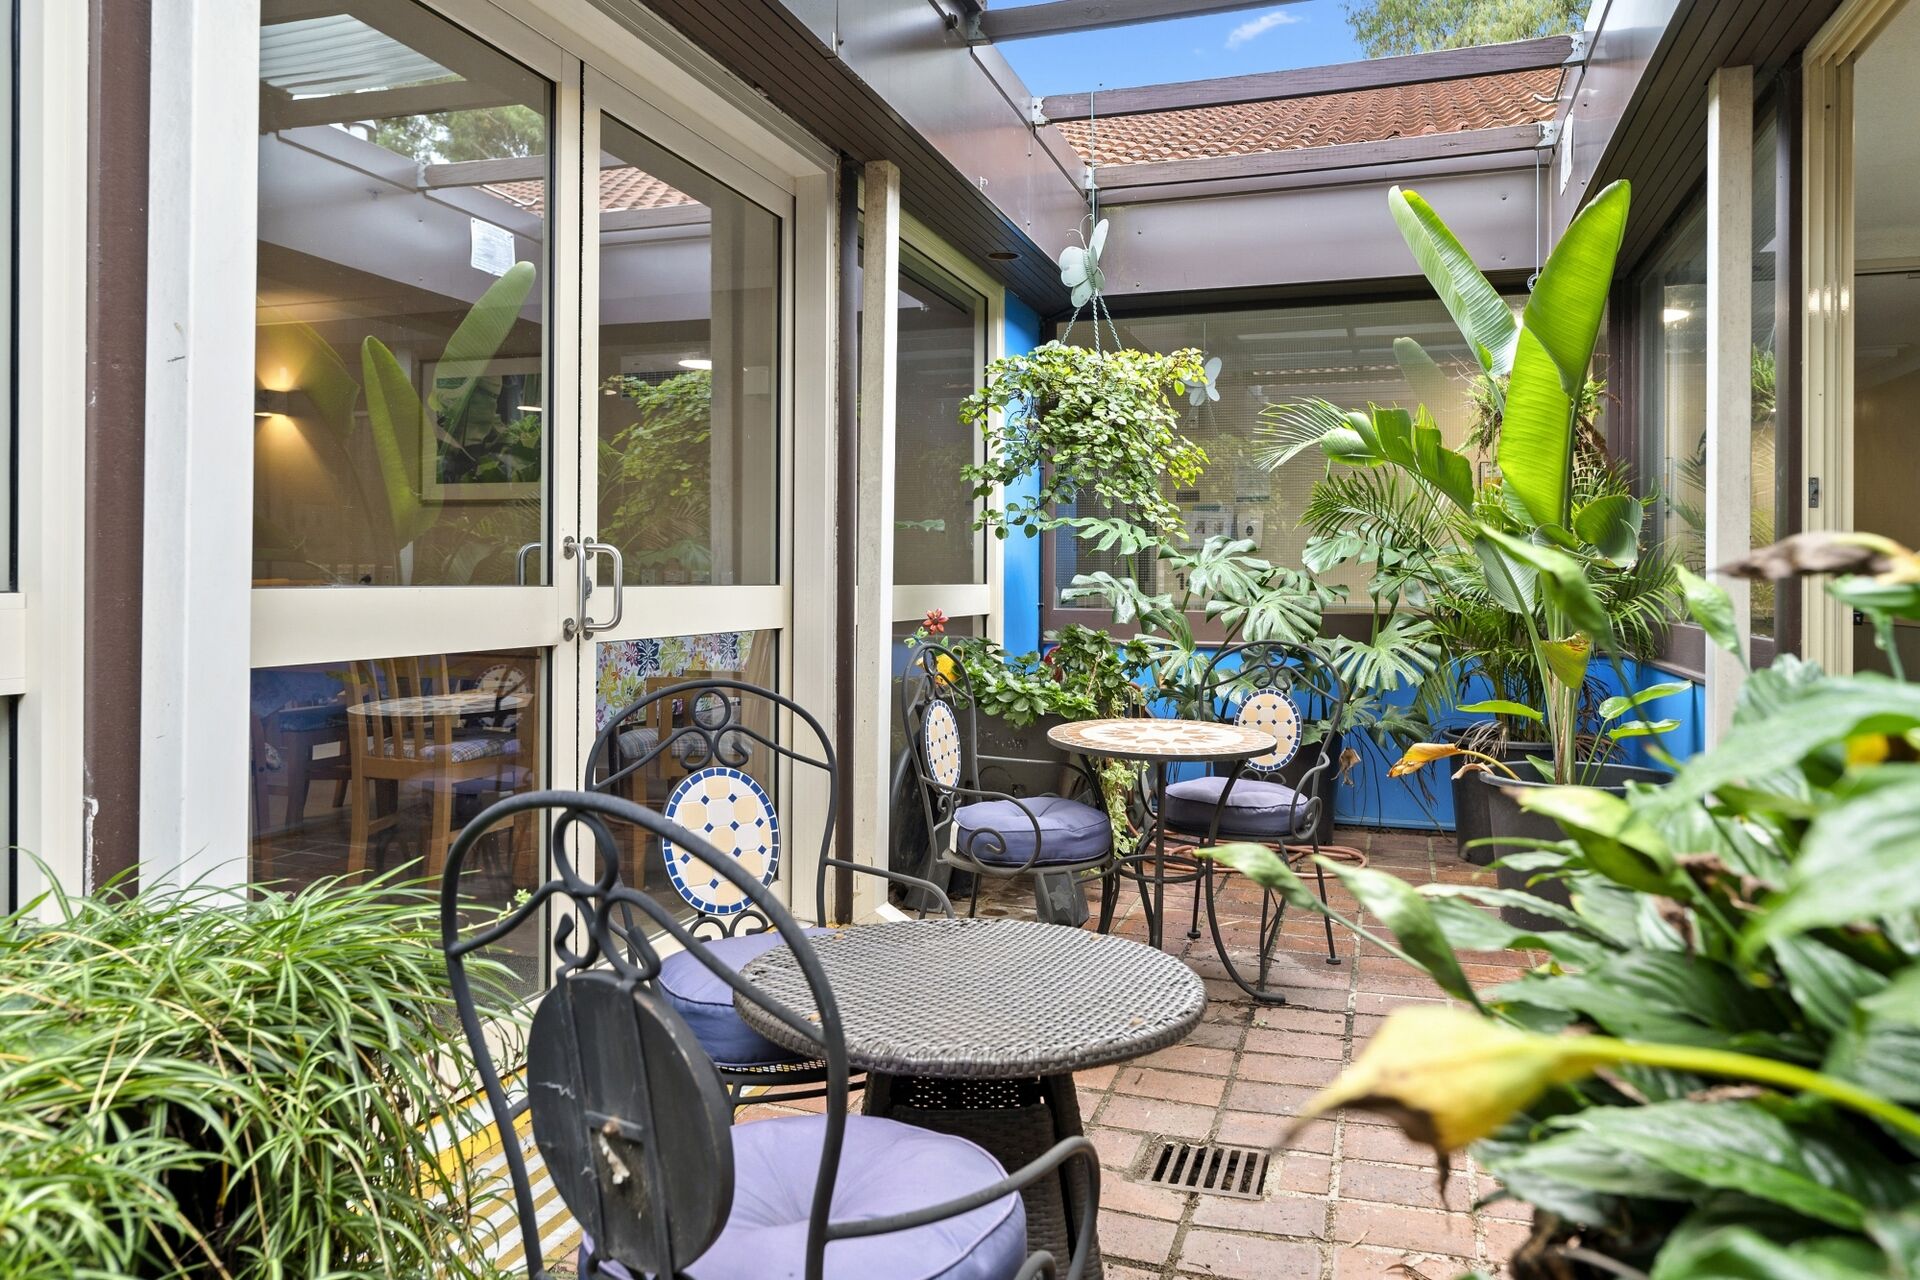 Social outdoor garden area at aminya centre aged care home in baulkham hills for low care and dementia